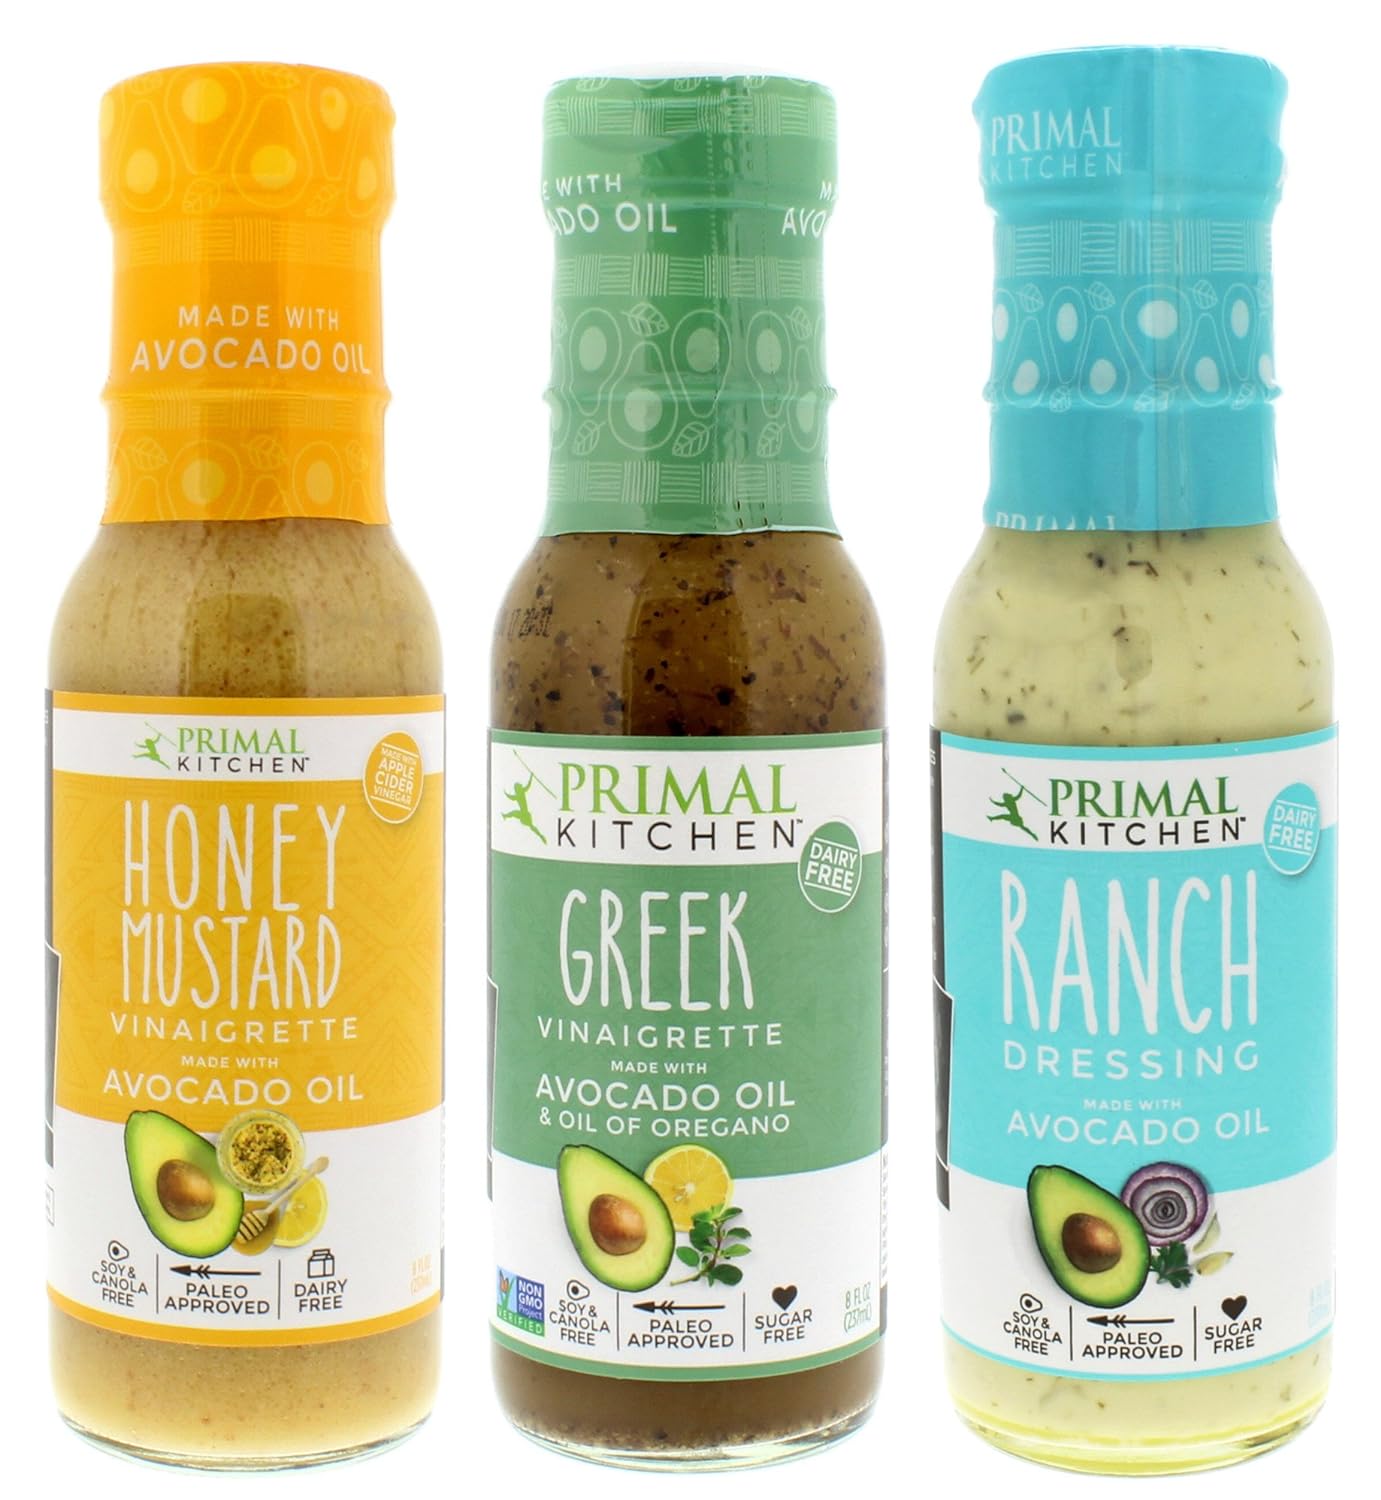 primal kitchen ranch dressing review